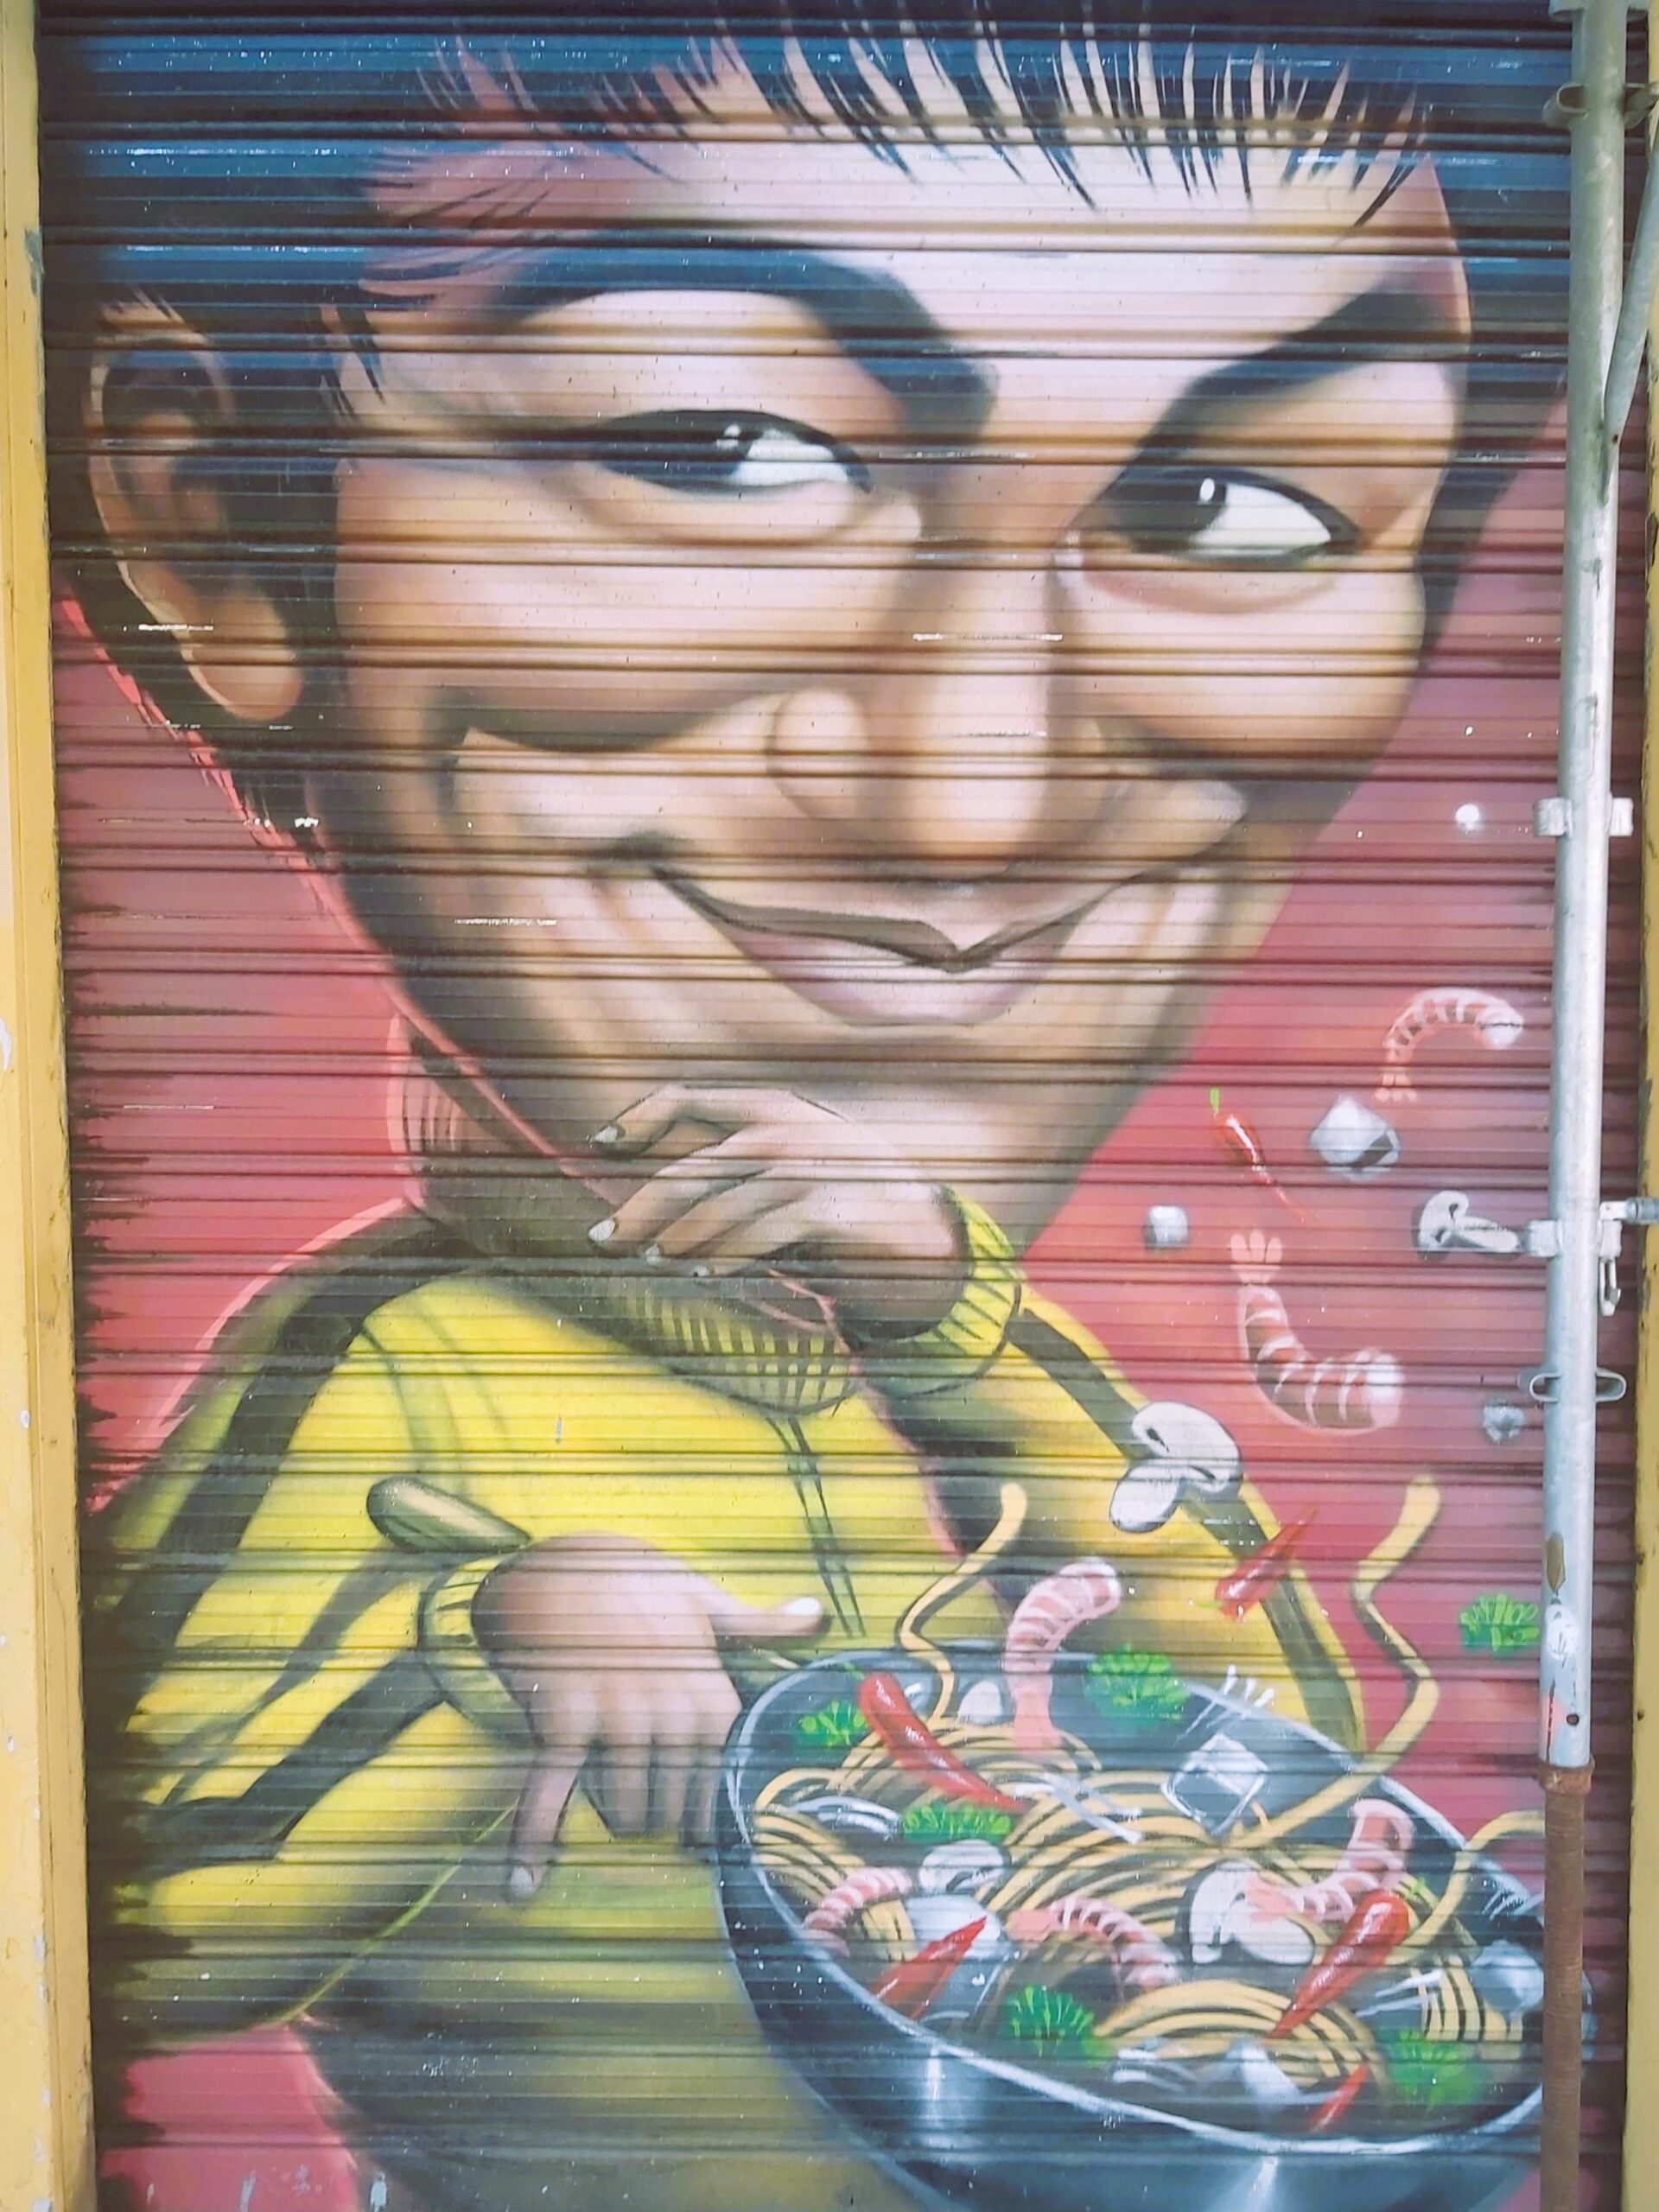 A graffiti image of a man holding a frying pan of noodles in Milan, Italy